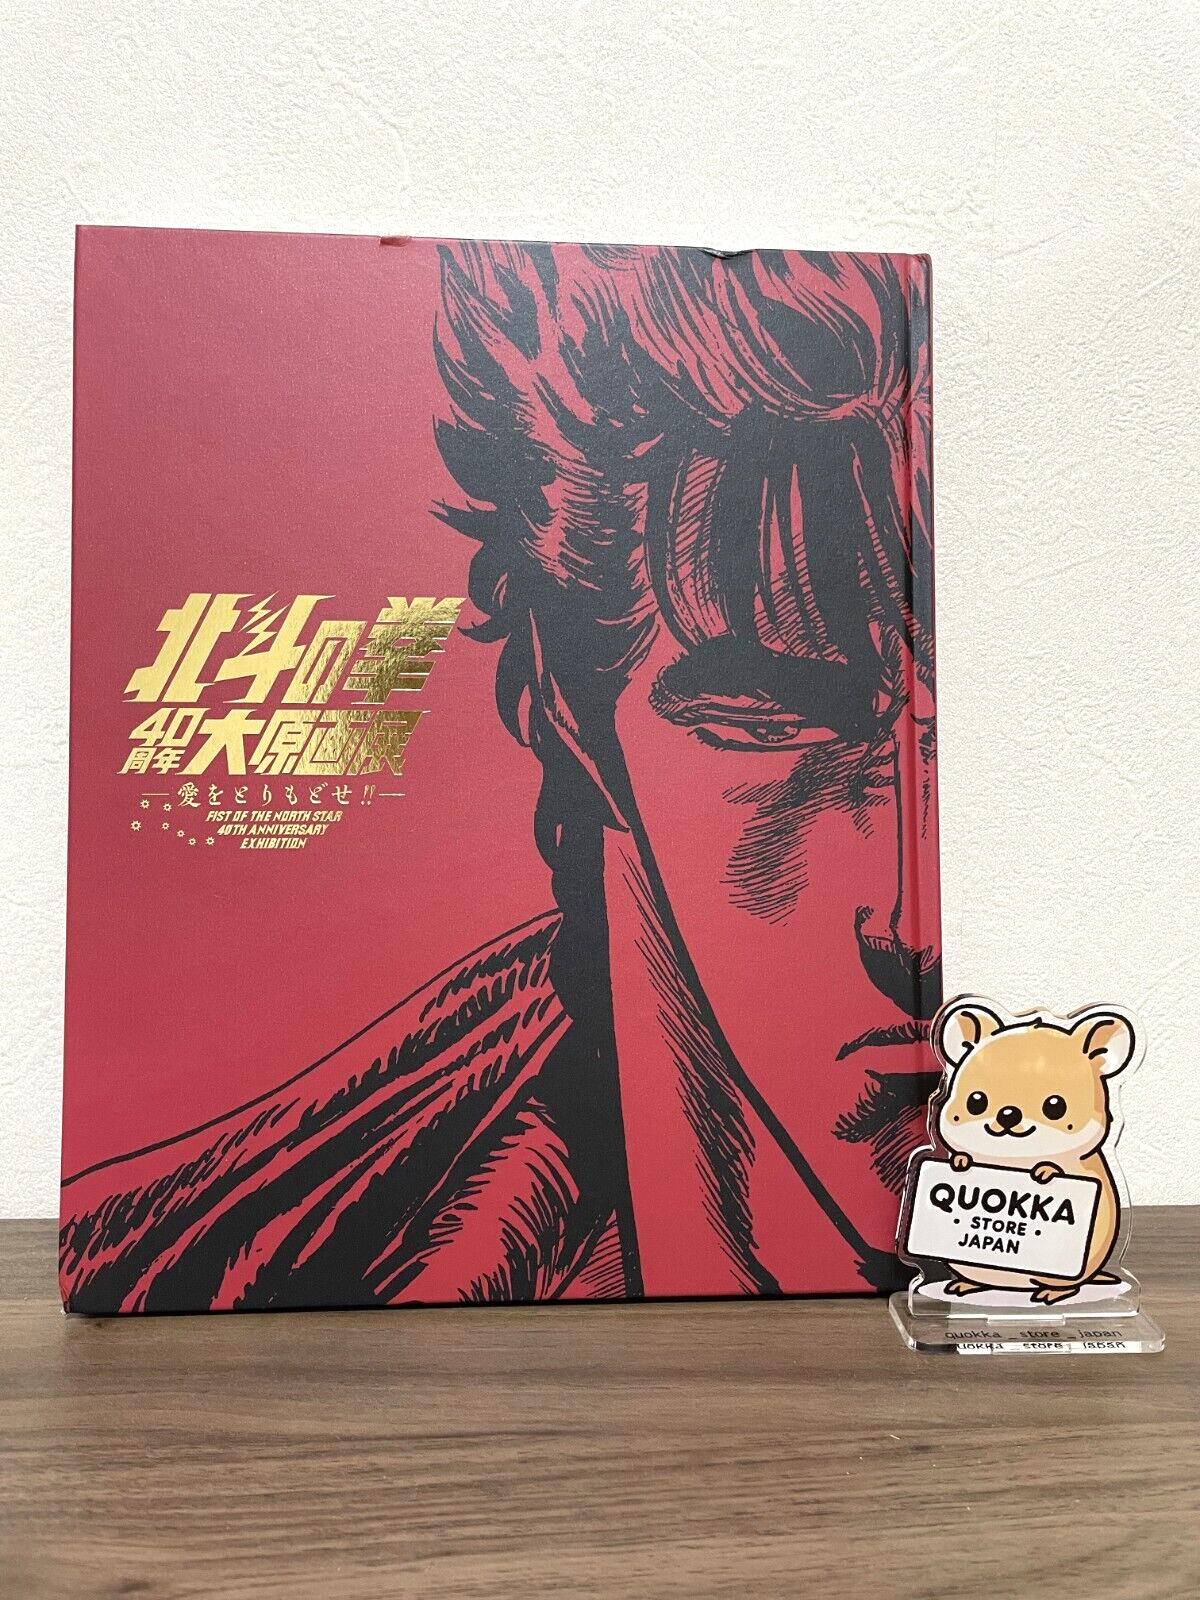 Fist of the North Star 40th Anniversary Original Art Exhibition Official Catalog